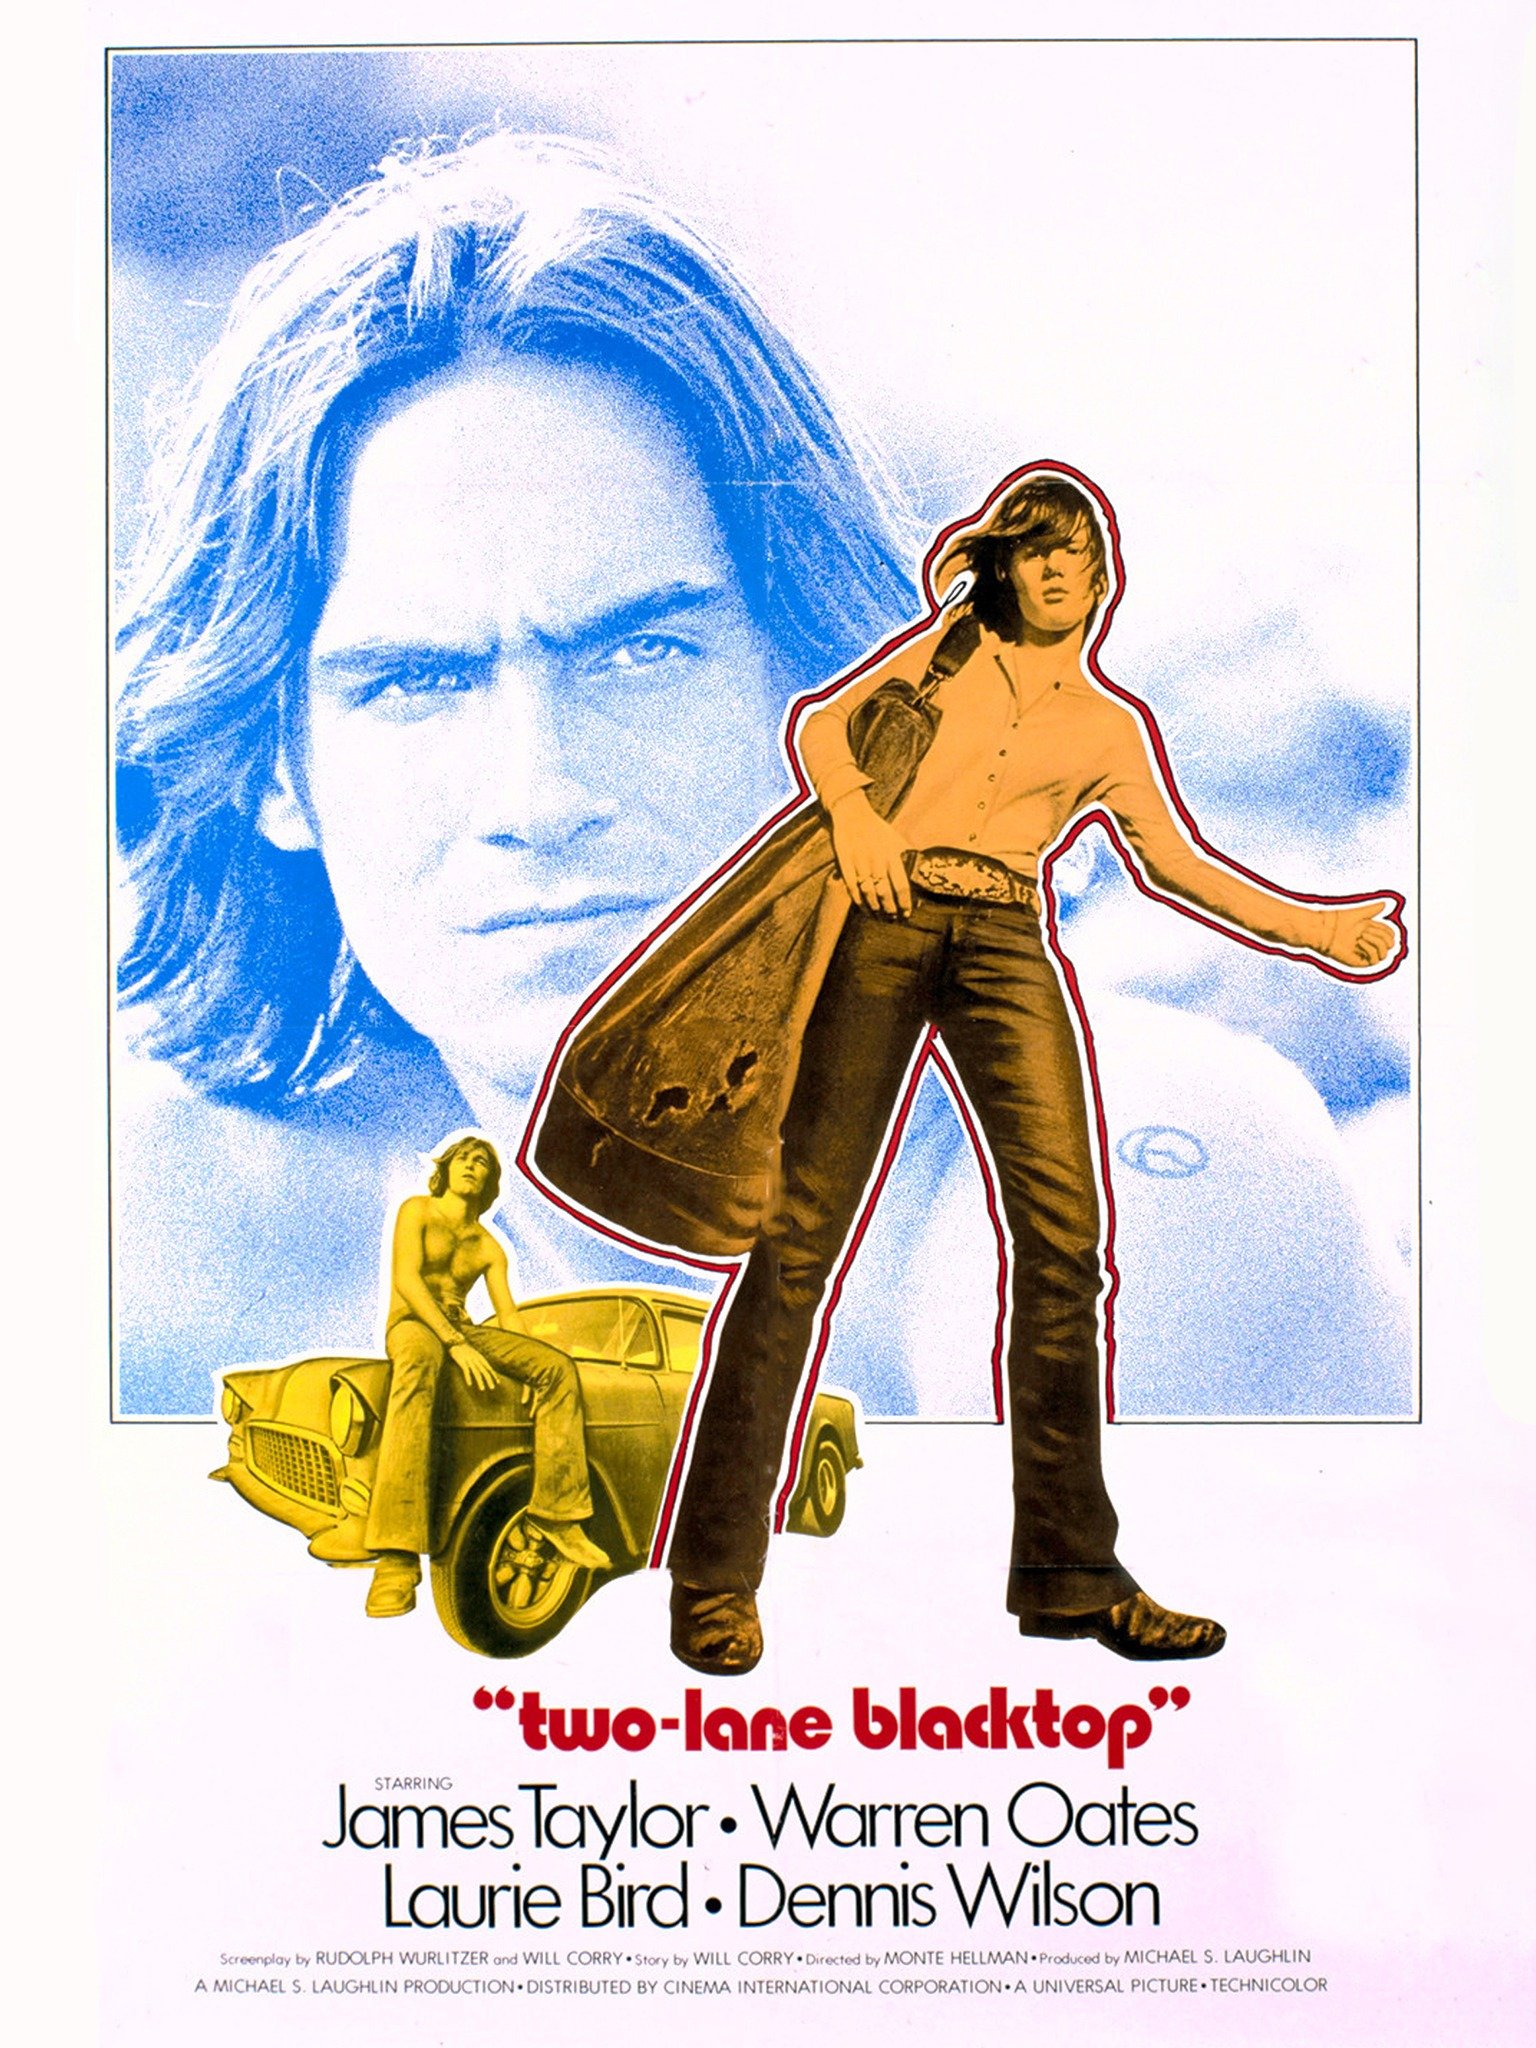 Two Lane Blacktop film poster with man and car